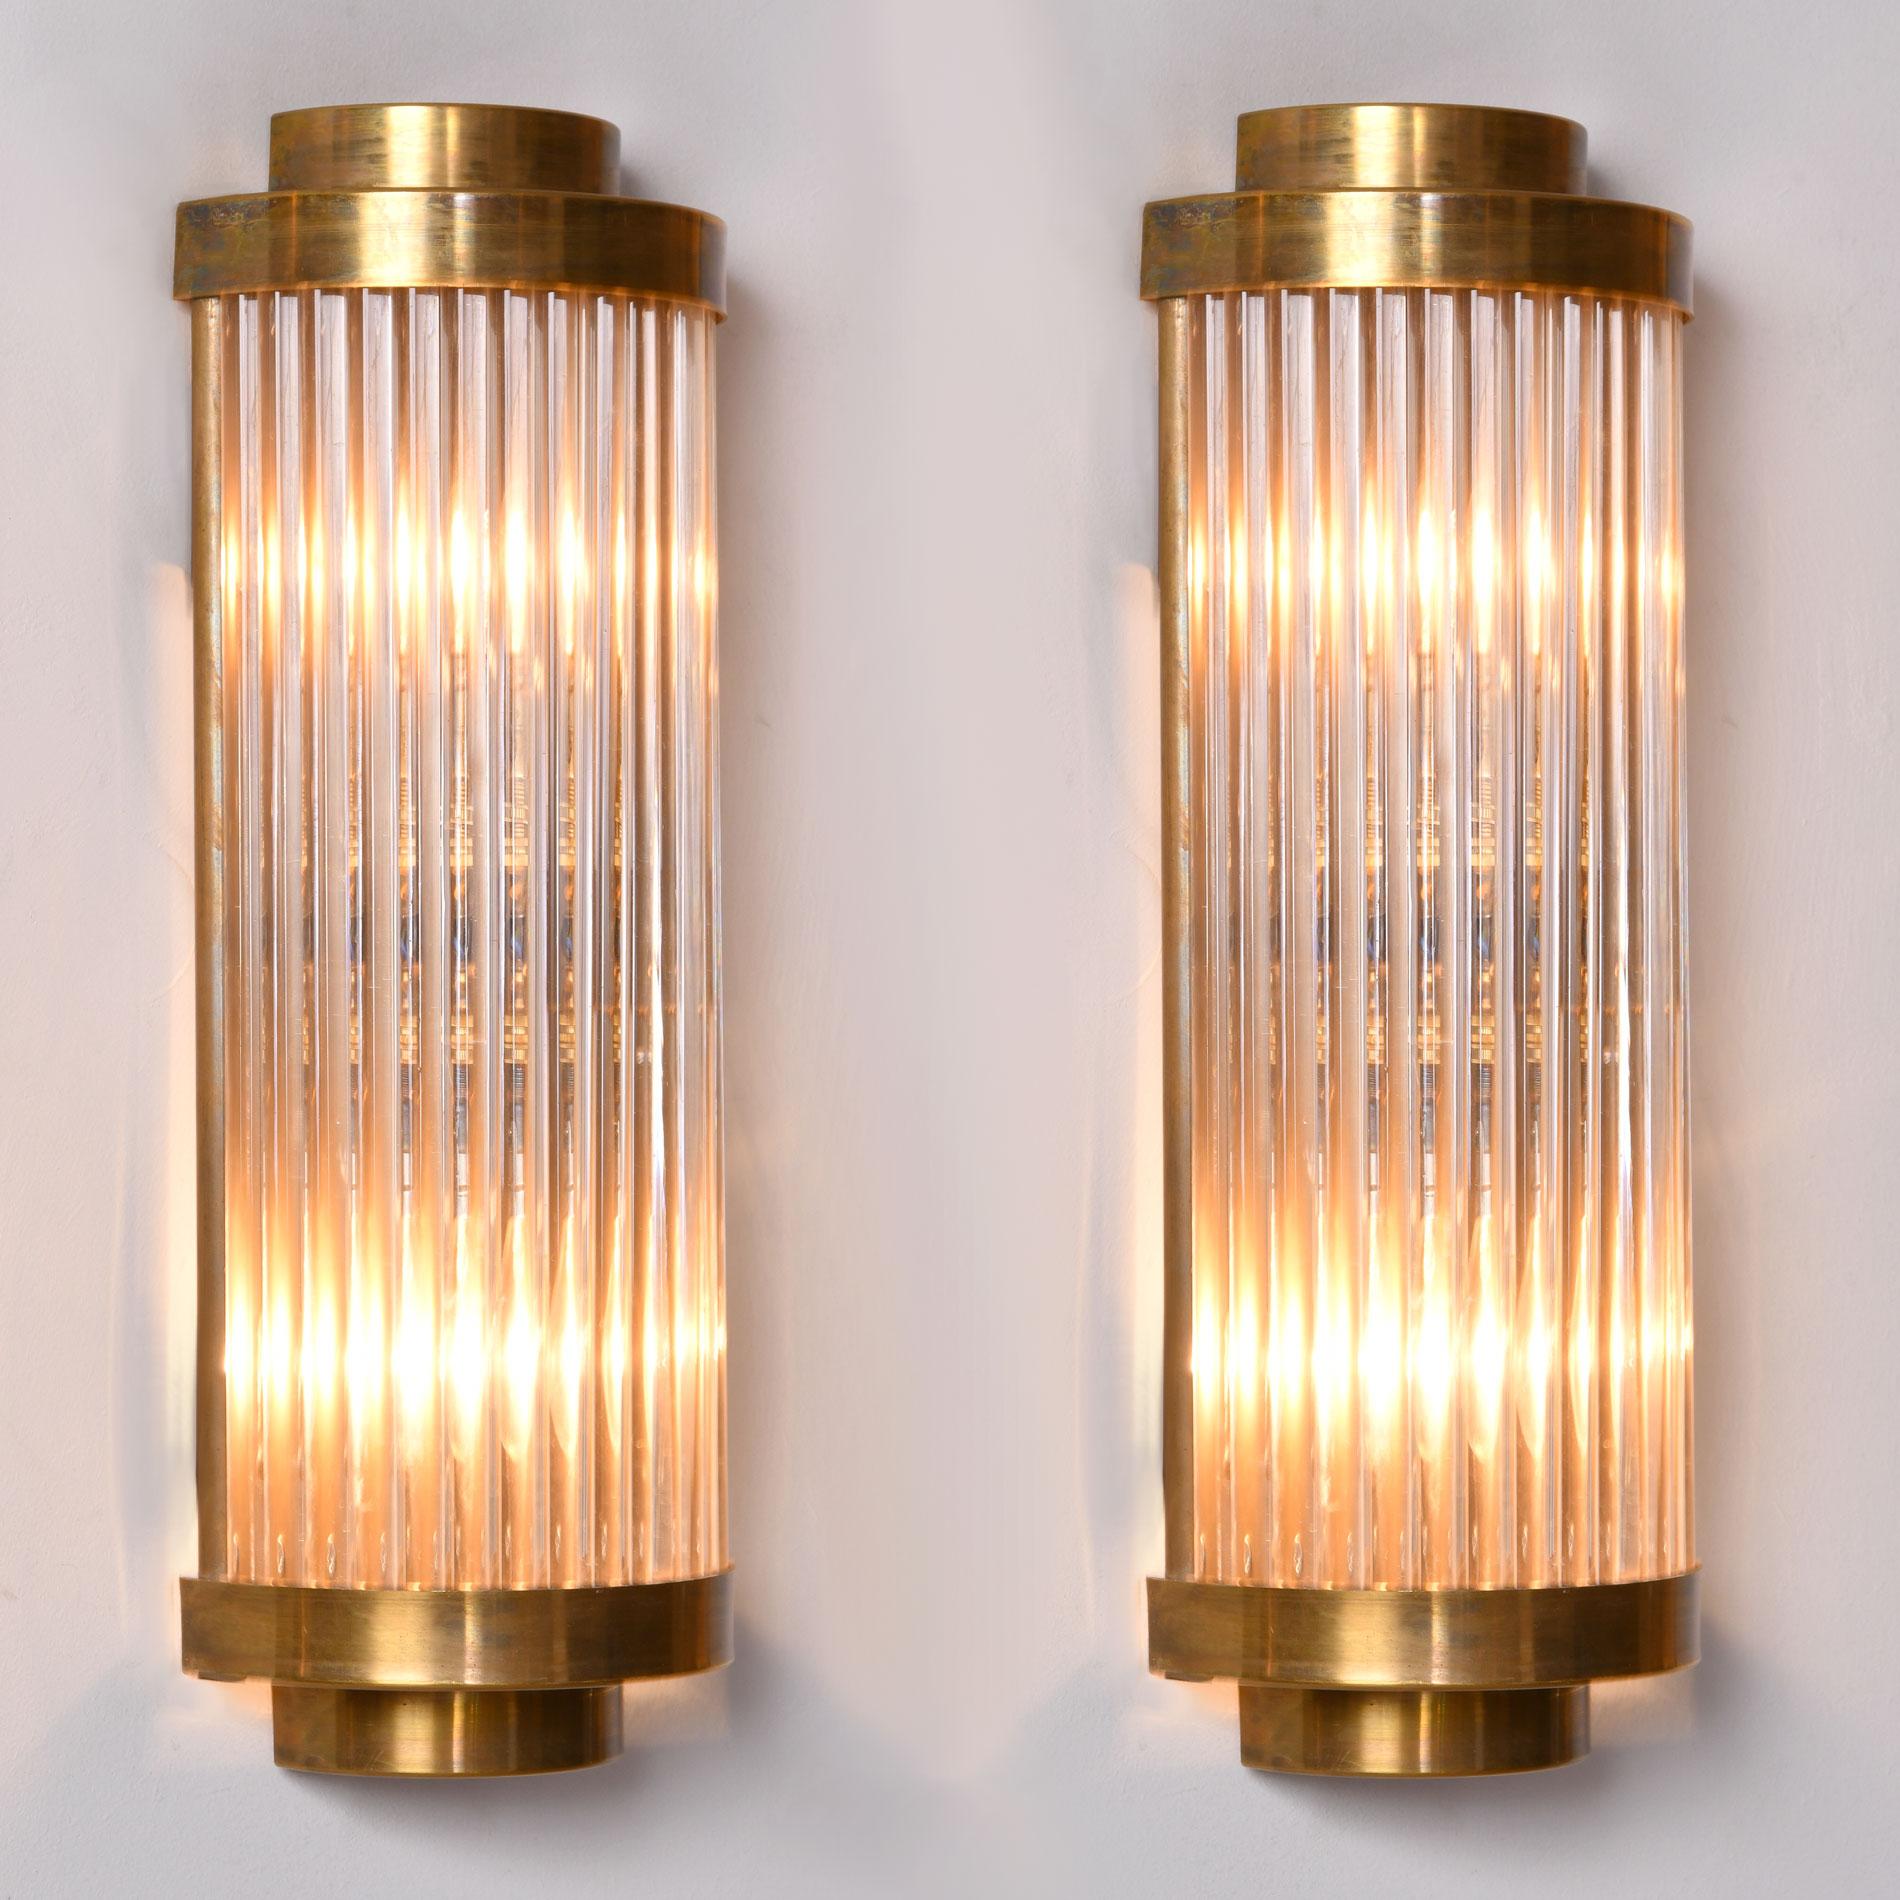 This ‘Ravello’ wall light takes its inspiration from a timelessly classic Art Deco design.
Multiple Italian glass rods form a semi-circle which is capped, top and bottom by 2 tiers of curved brass. The brass back plate holds two light bulbs and